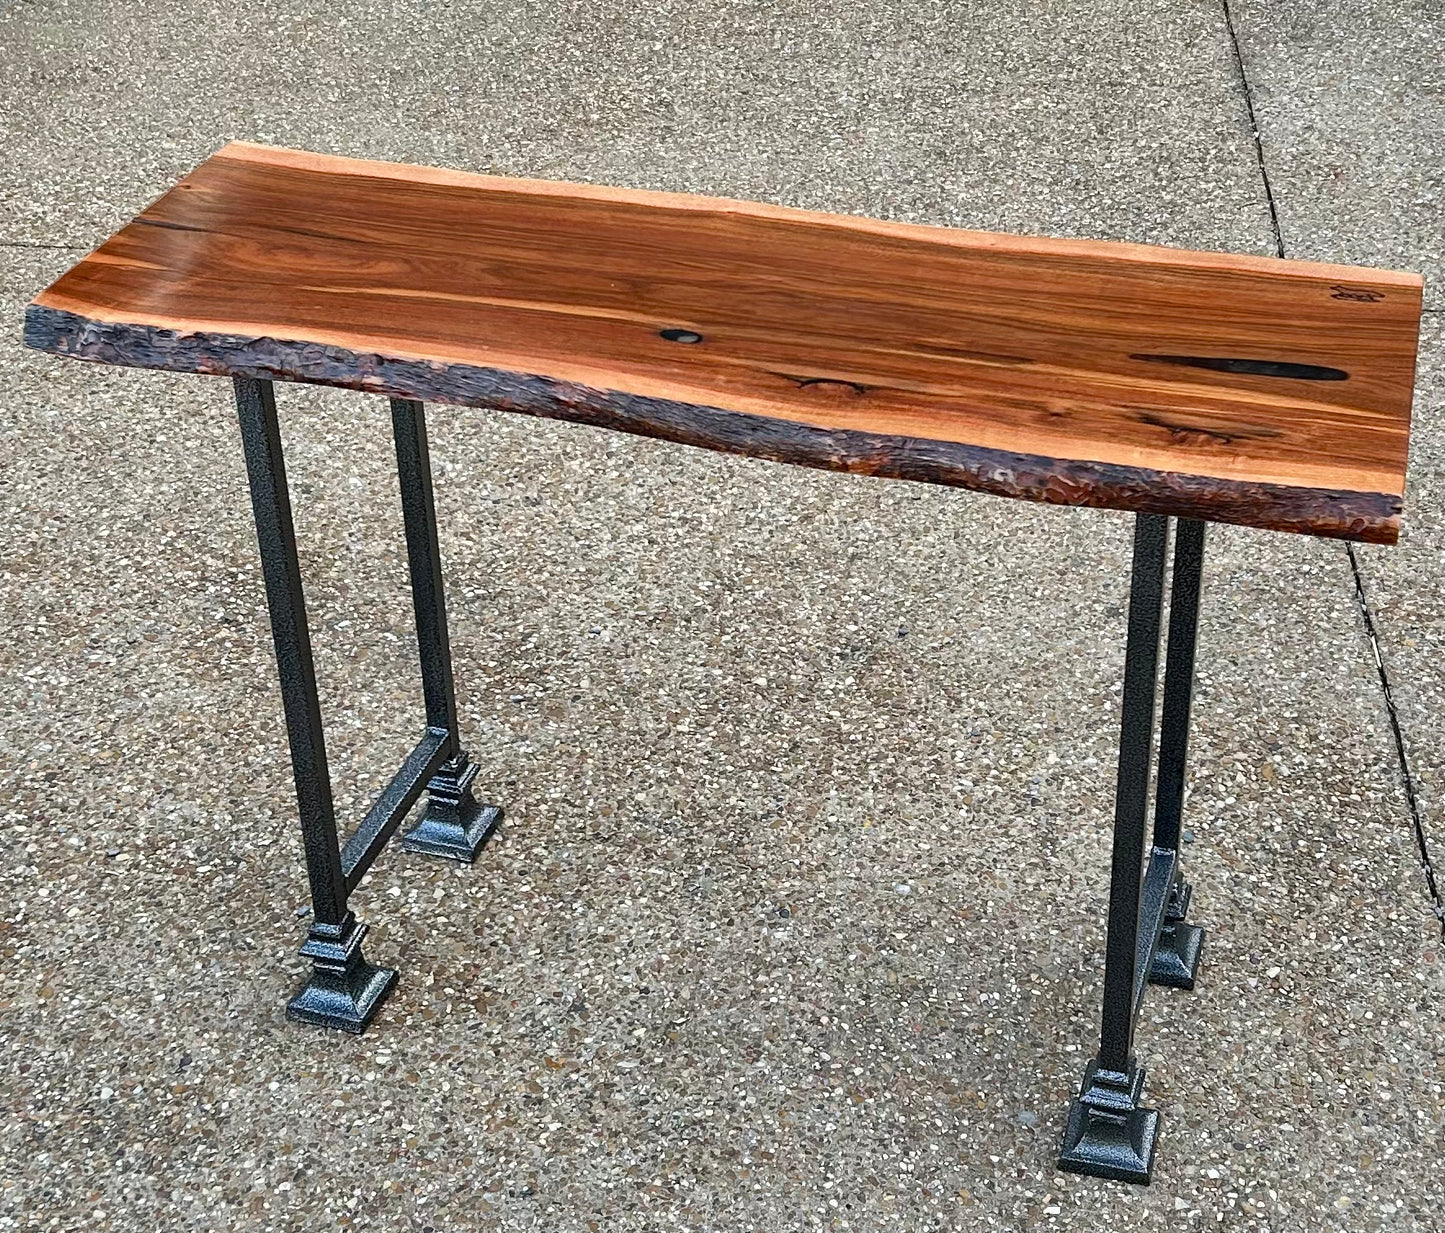 Live Edge Patagonian Rosewood Table w/bell feet legs